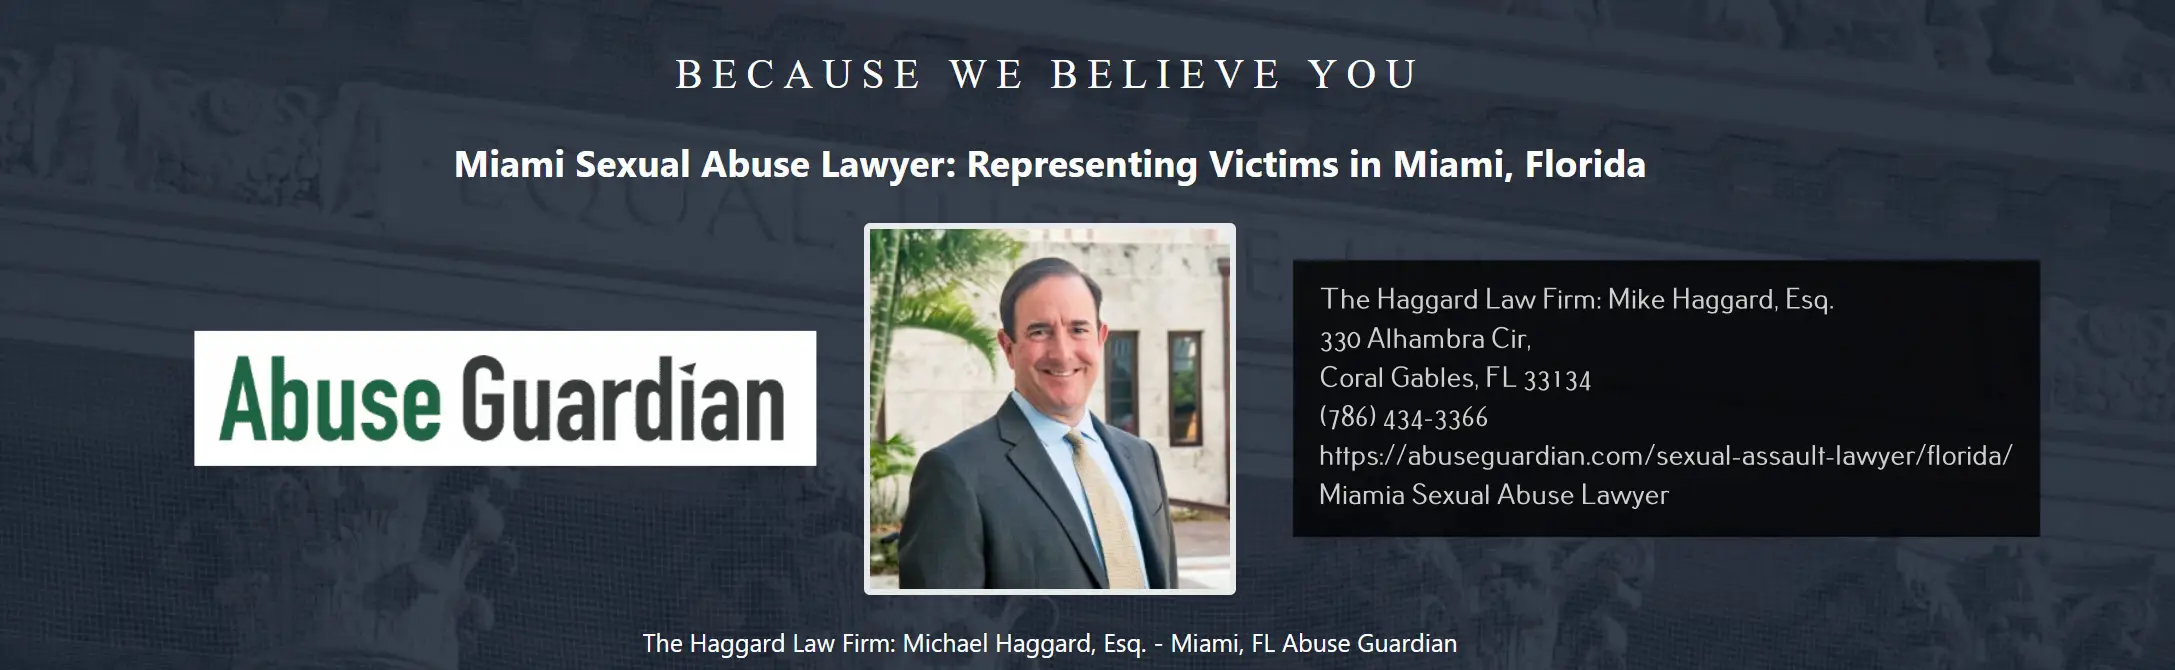 sexual abuse lawyer miami the haggard law firm: mike haggard, esq.